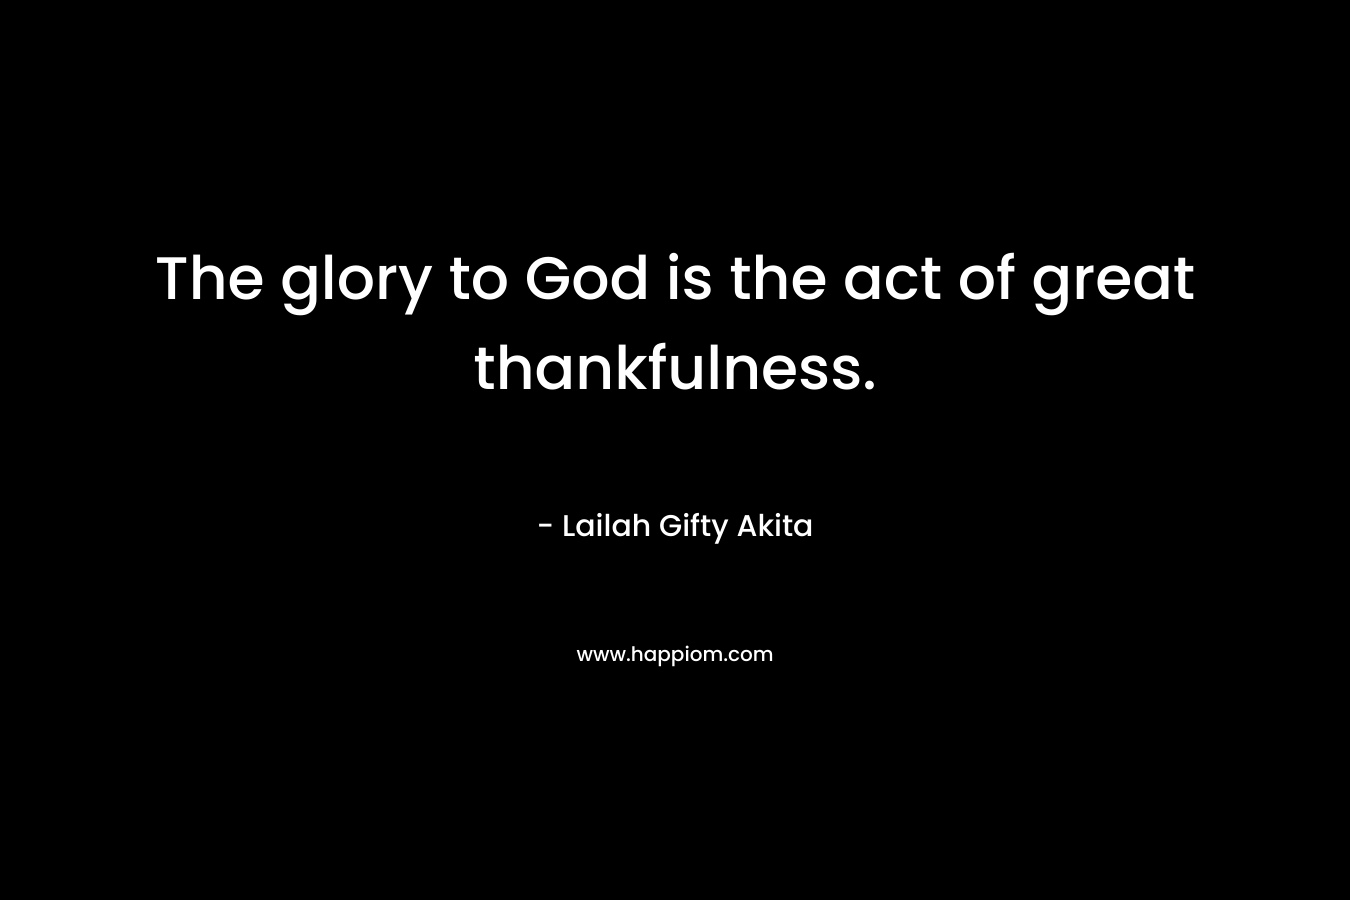 The glory to God is the act of great thankfulness.